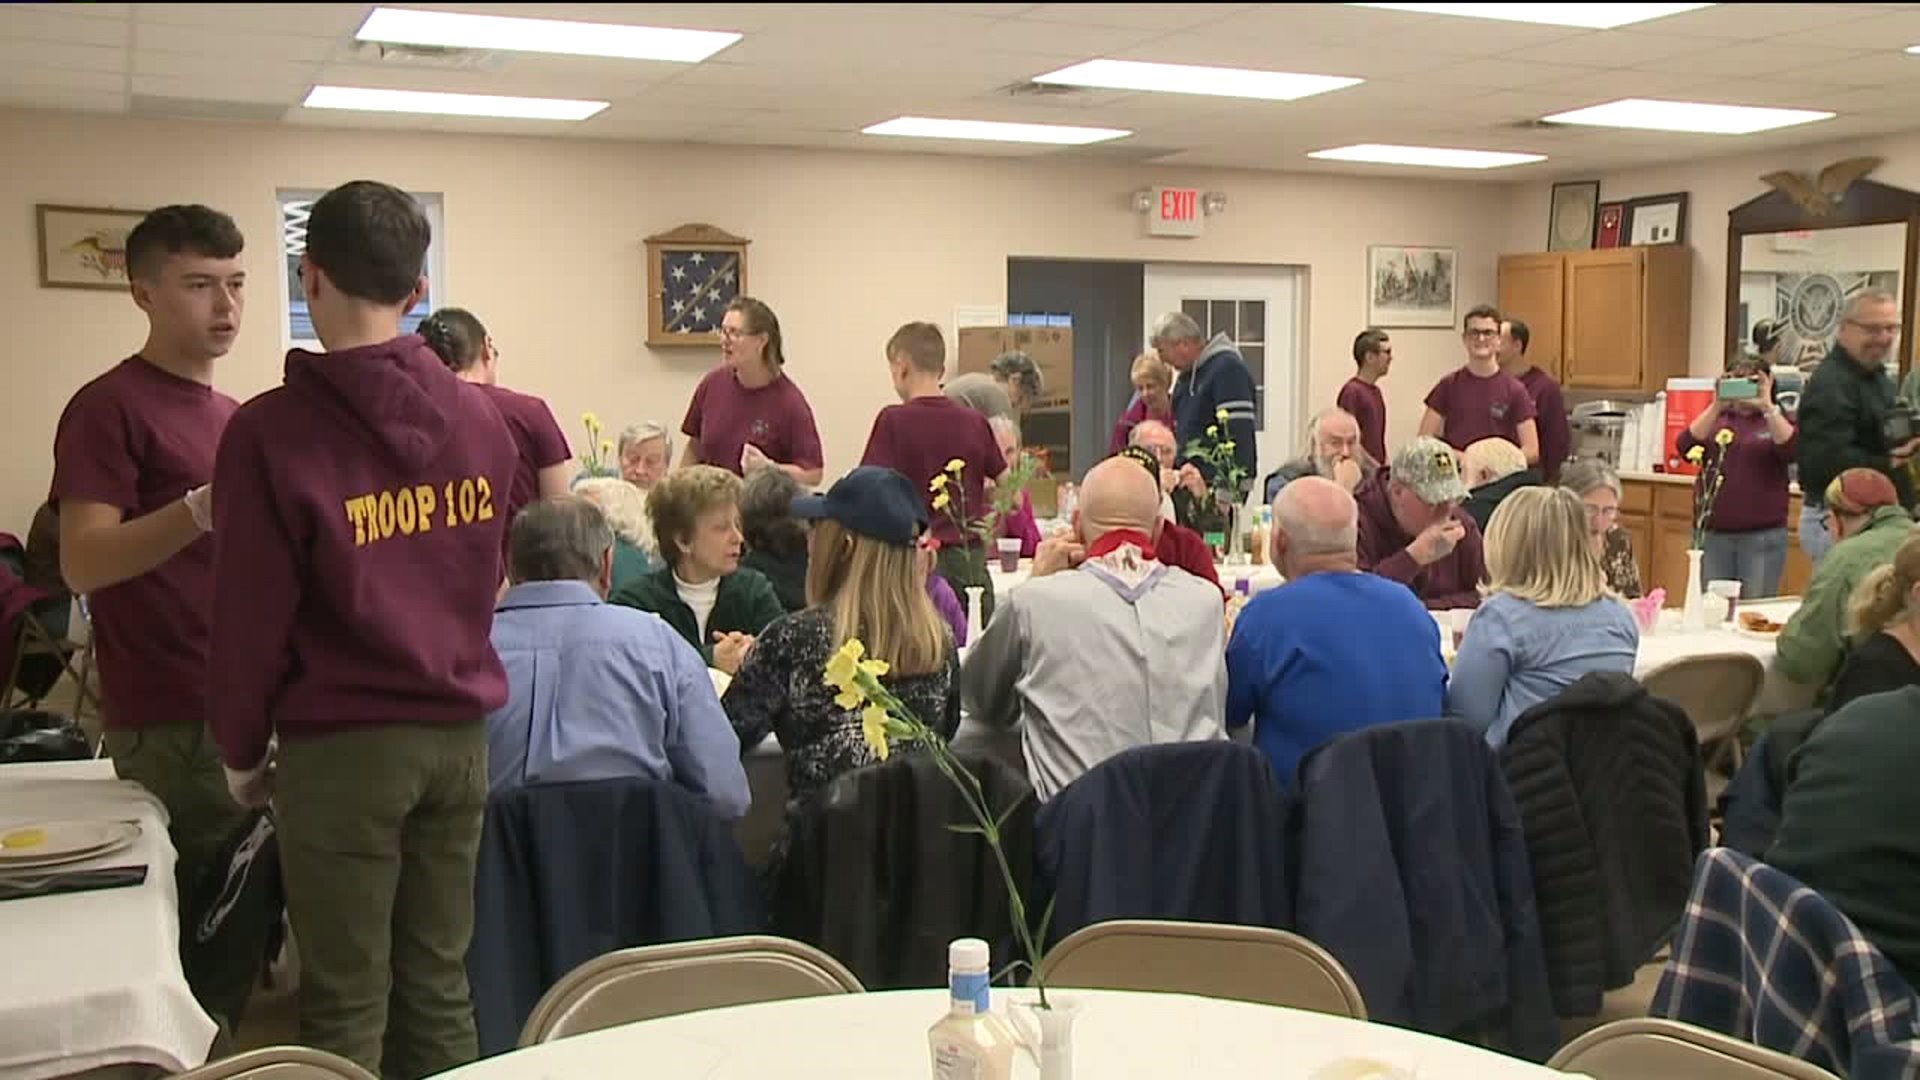 Boy Scout Puts on Free Dinner for Veterans